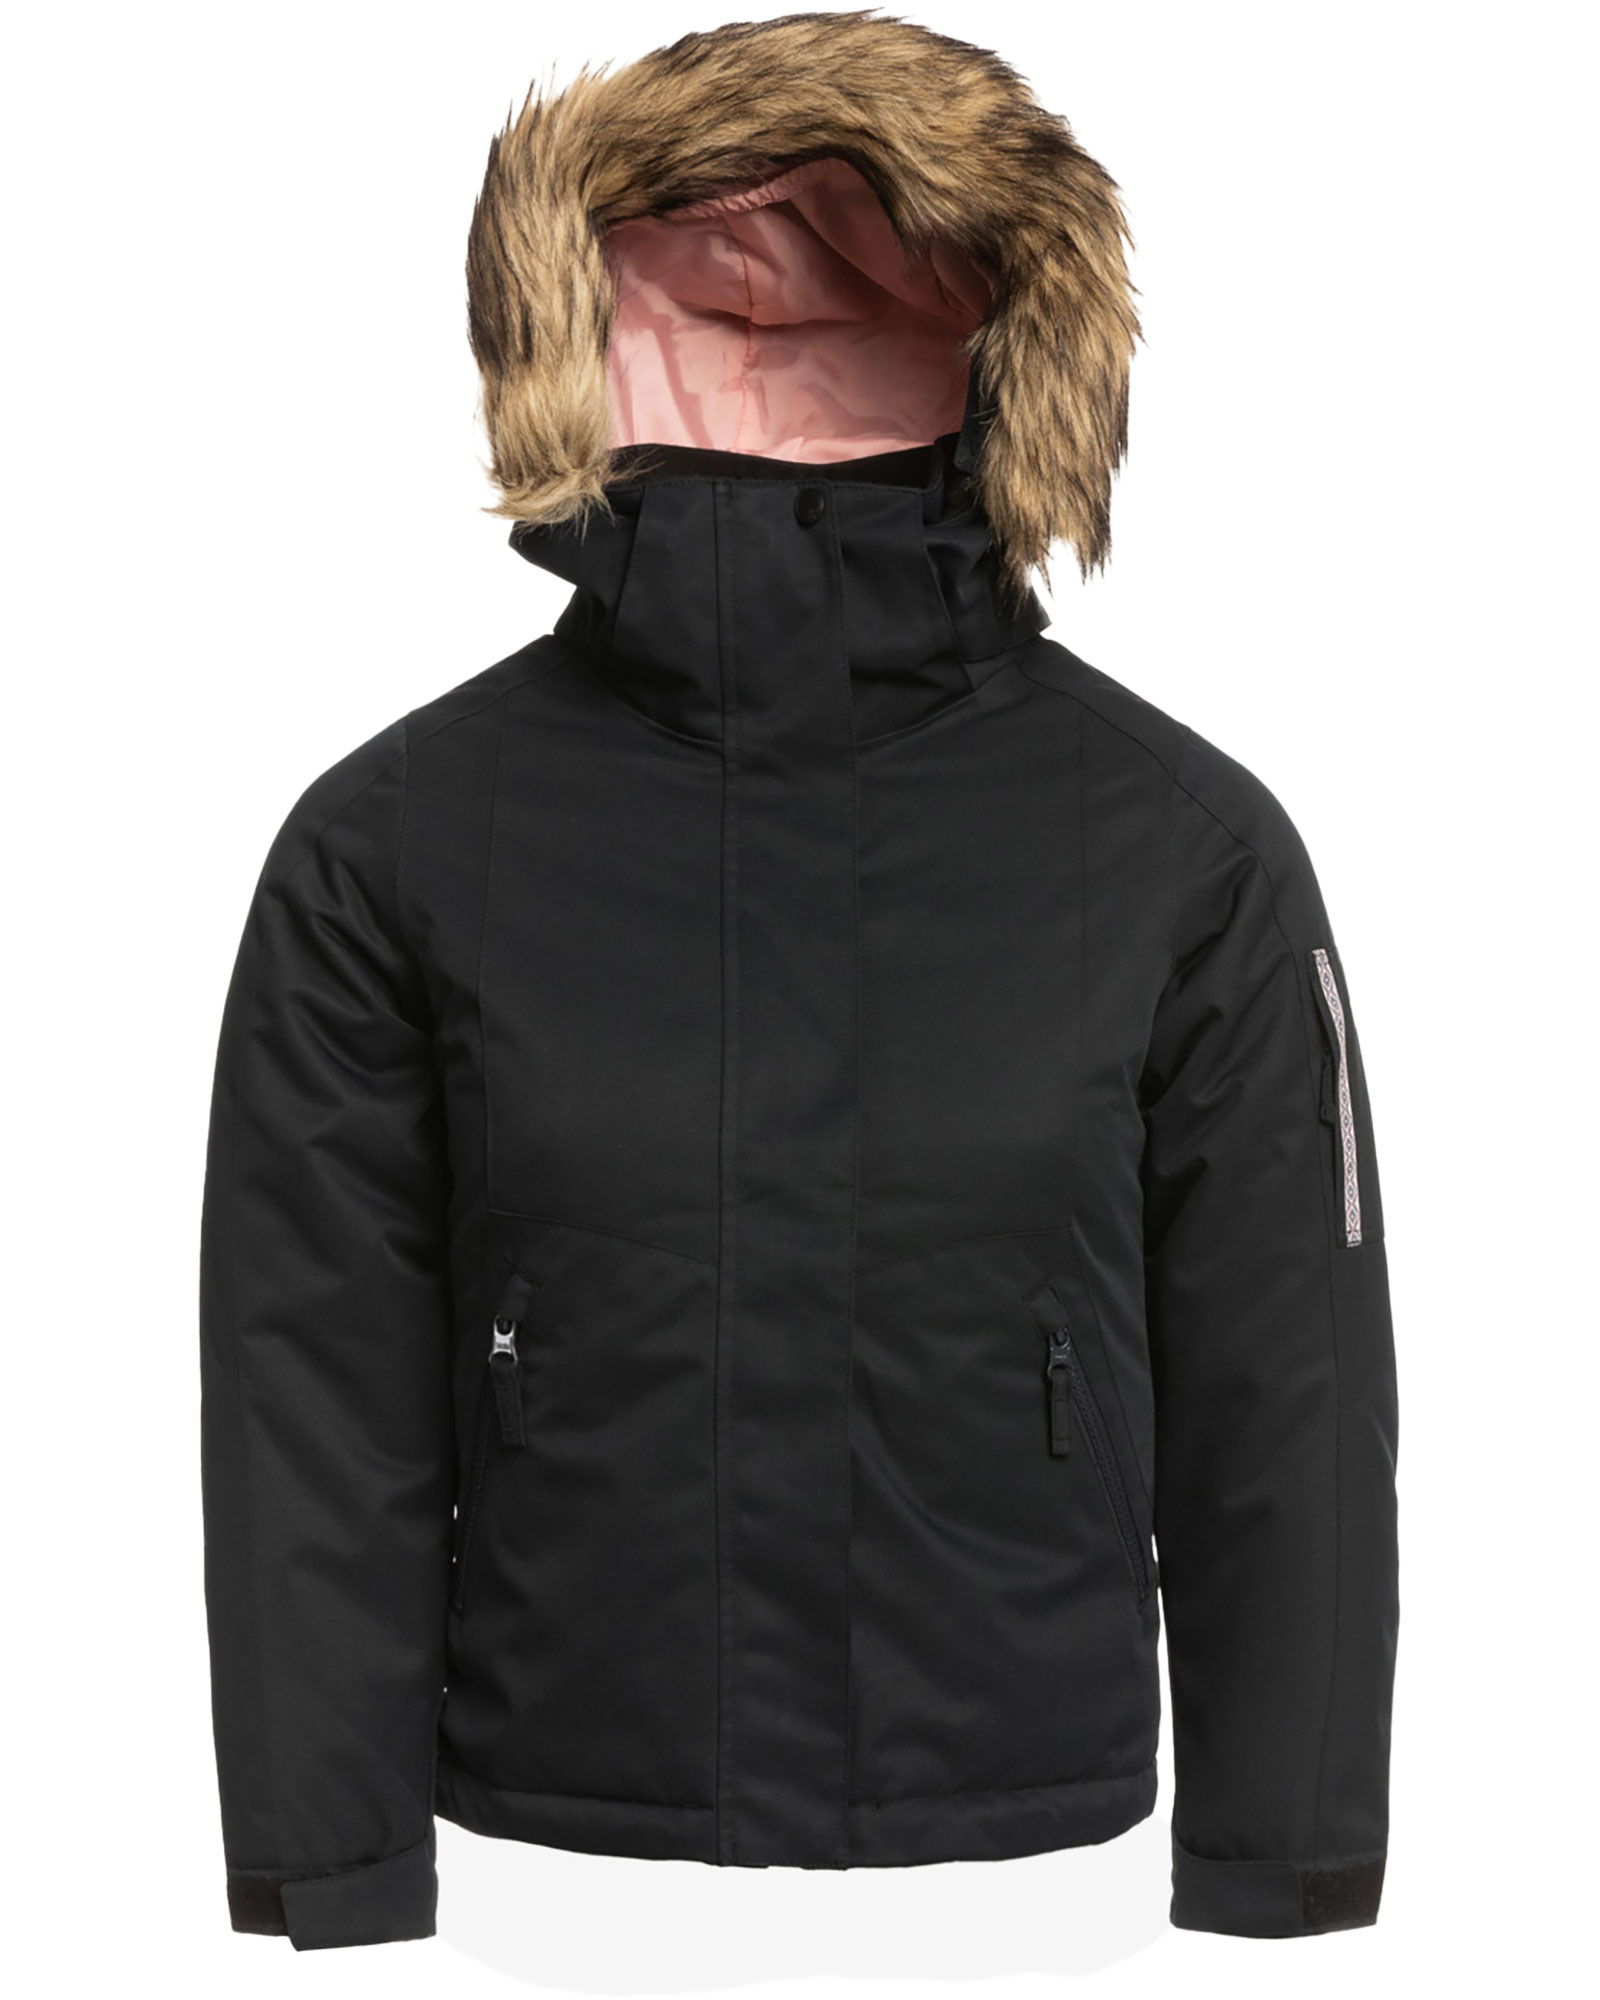 Product image of Roxy Mead Kids' Jacket